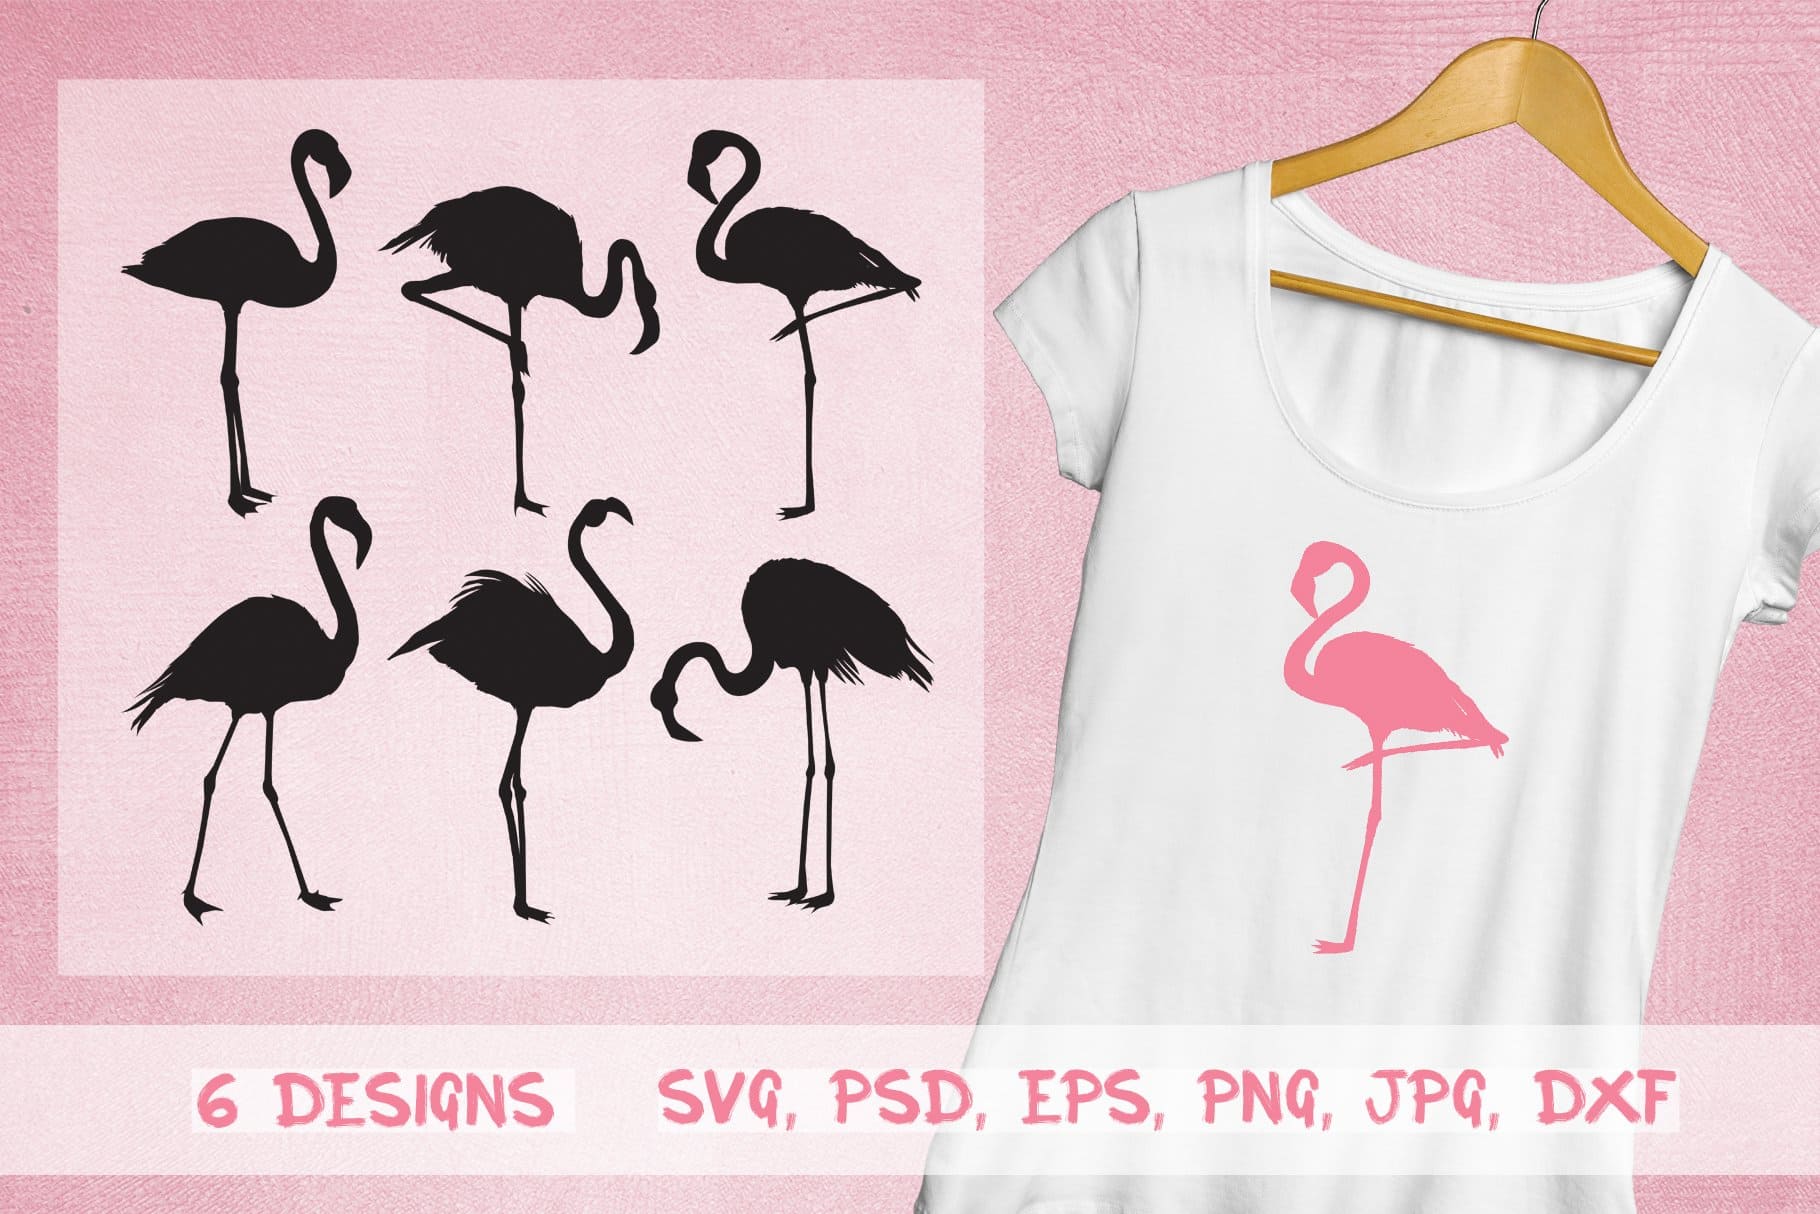 Flamingo Silhouette. EPS, JPEG, PNG, PSD, SVG, DXF.